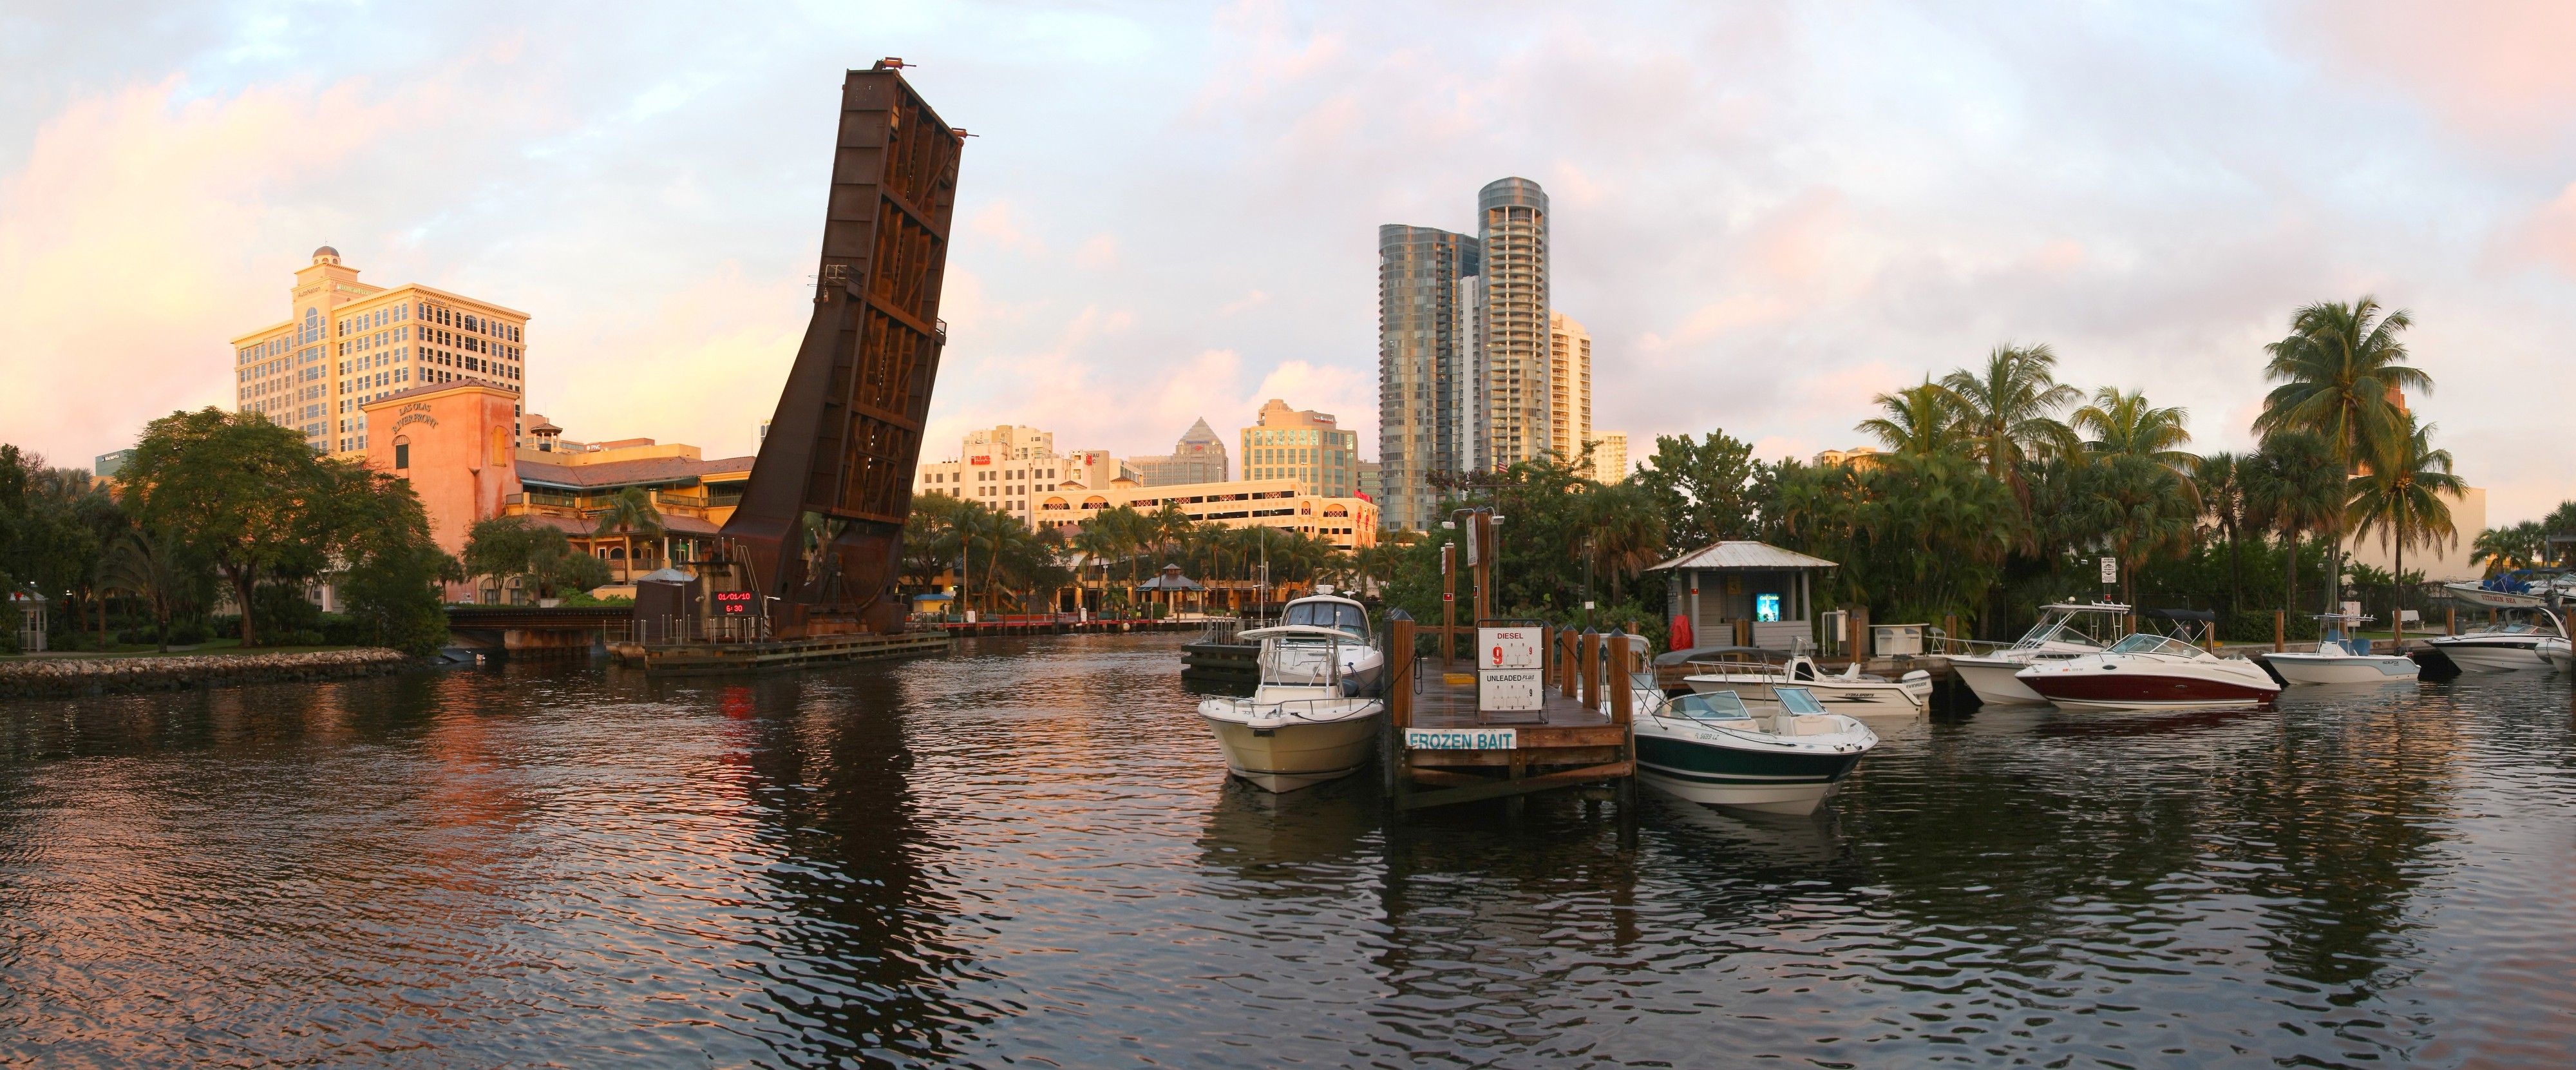 New River Ft Lauderdale